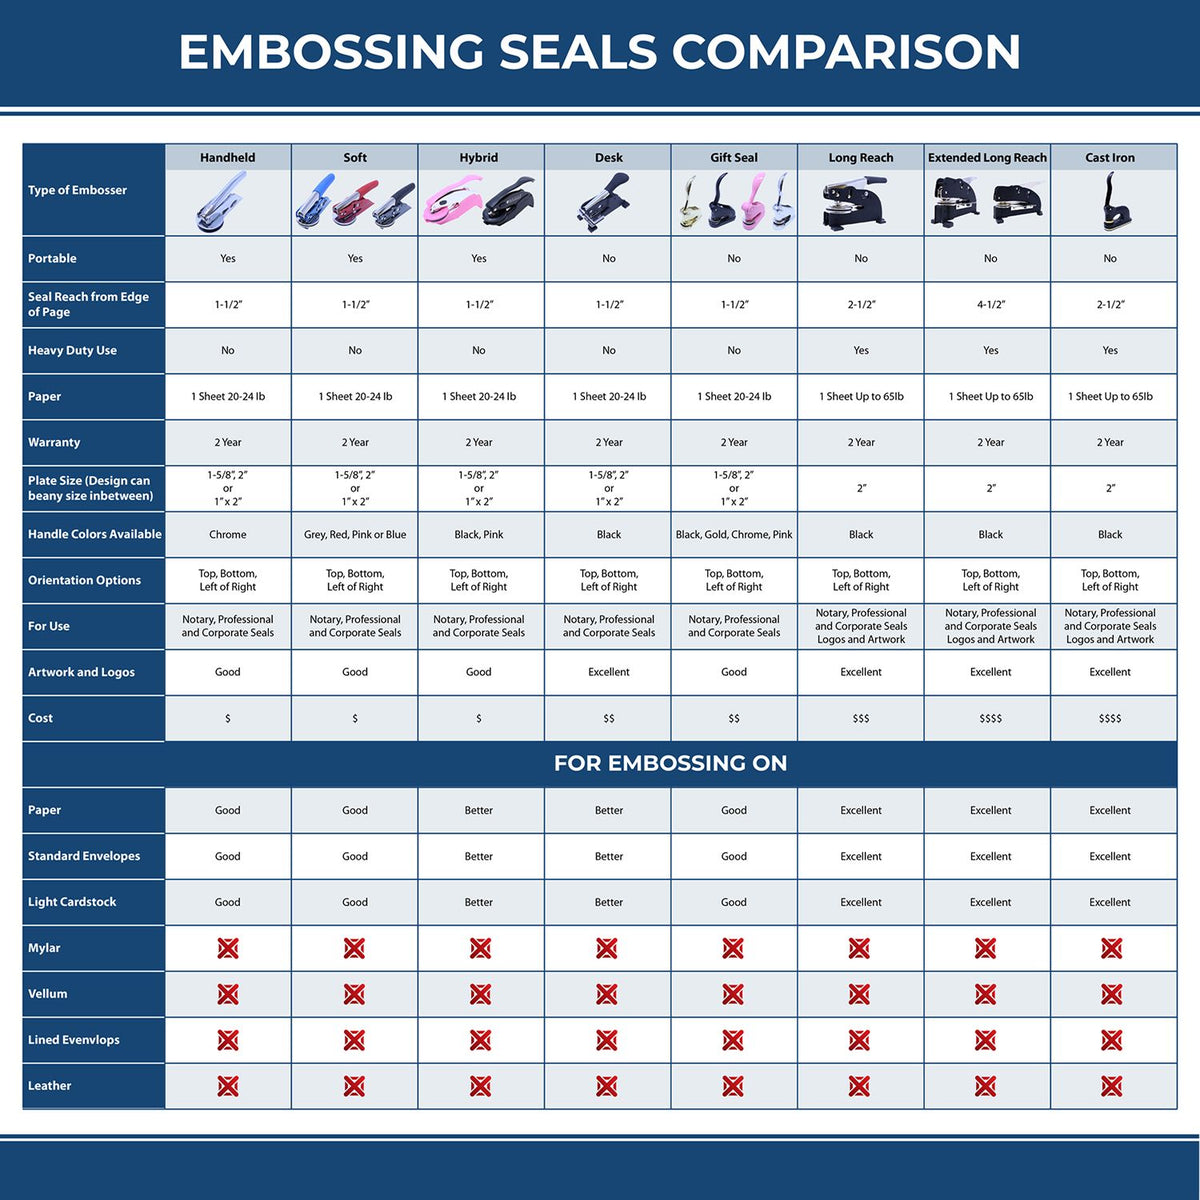 A comparison chart for the different types of mount models available for the Long Reach Alabama PE Seal.